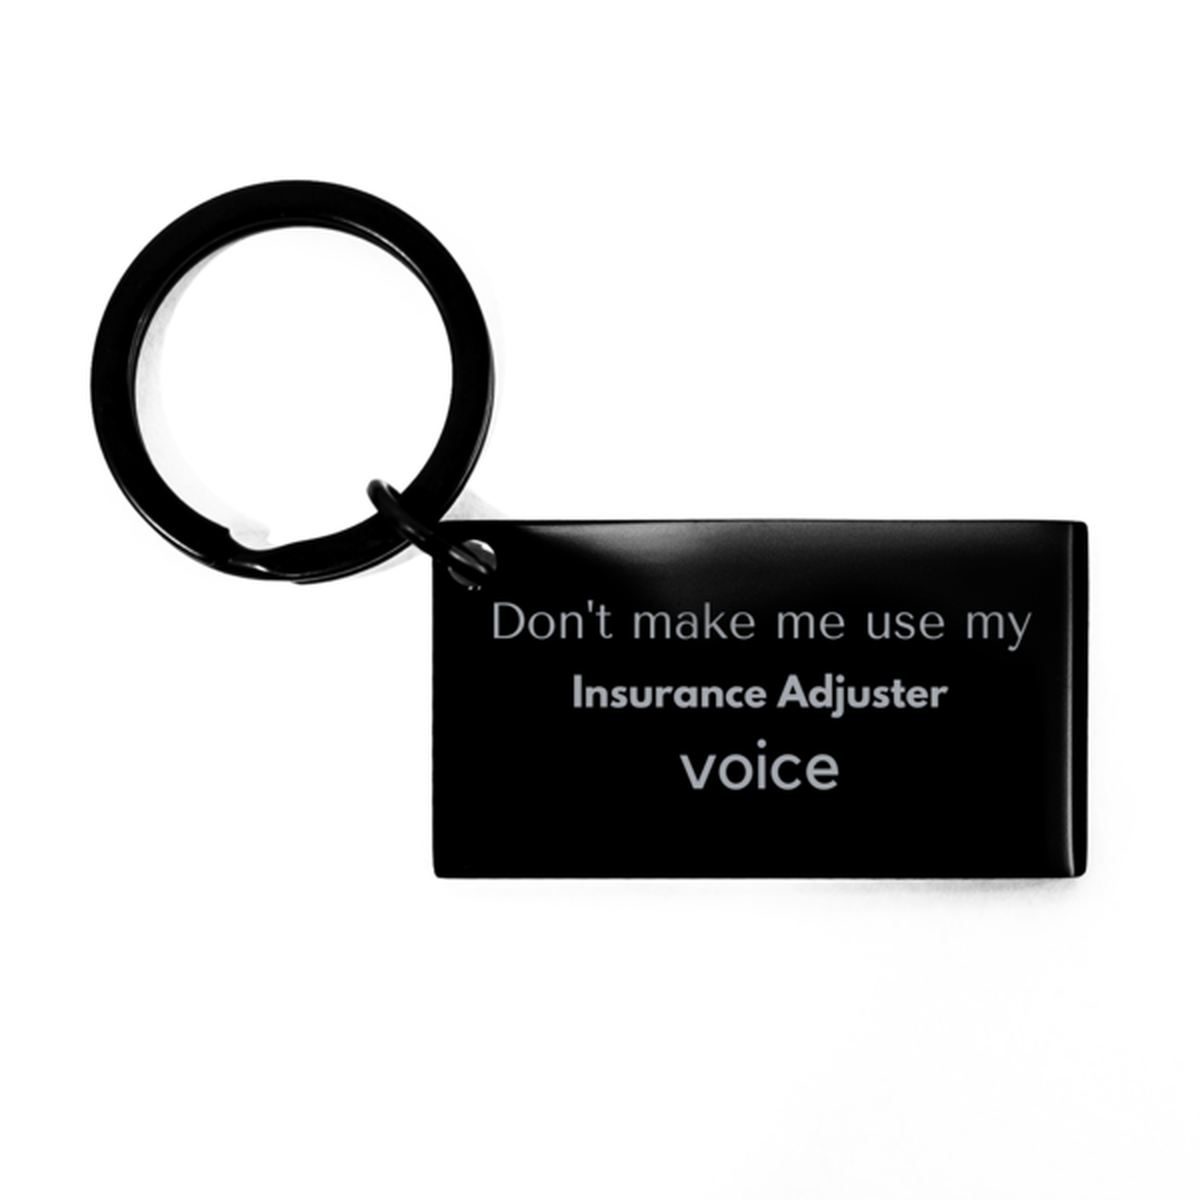 Don't make me use my Insurance Adjuster voice, Sarcasm Insurance Adjuster Gifts, Christmas Insurance Adjuster Keychain Birthday Unique Gifts For Insurance Adjuster Coworkers, Men, Women, Colleague, Friends